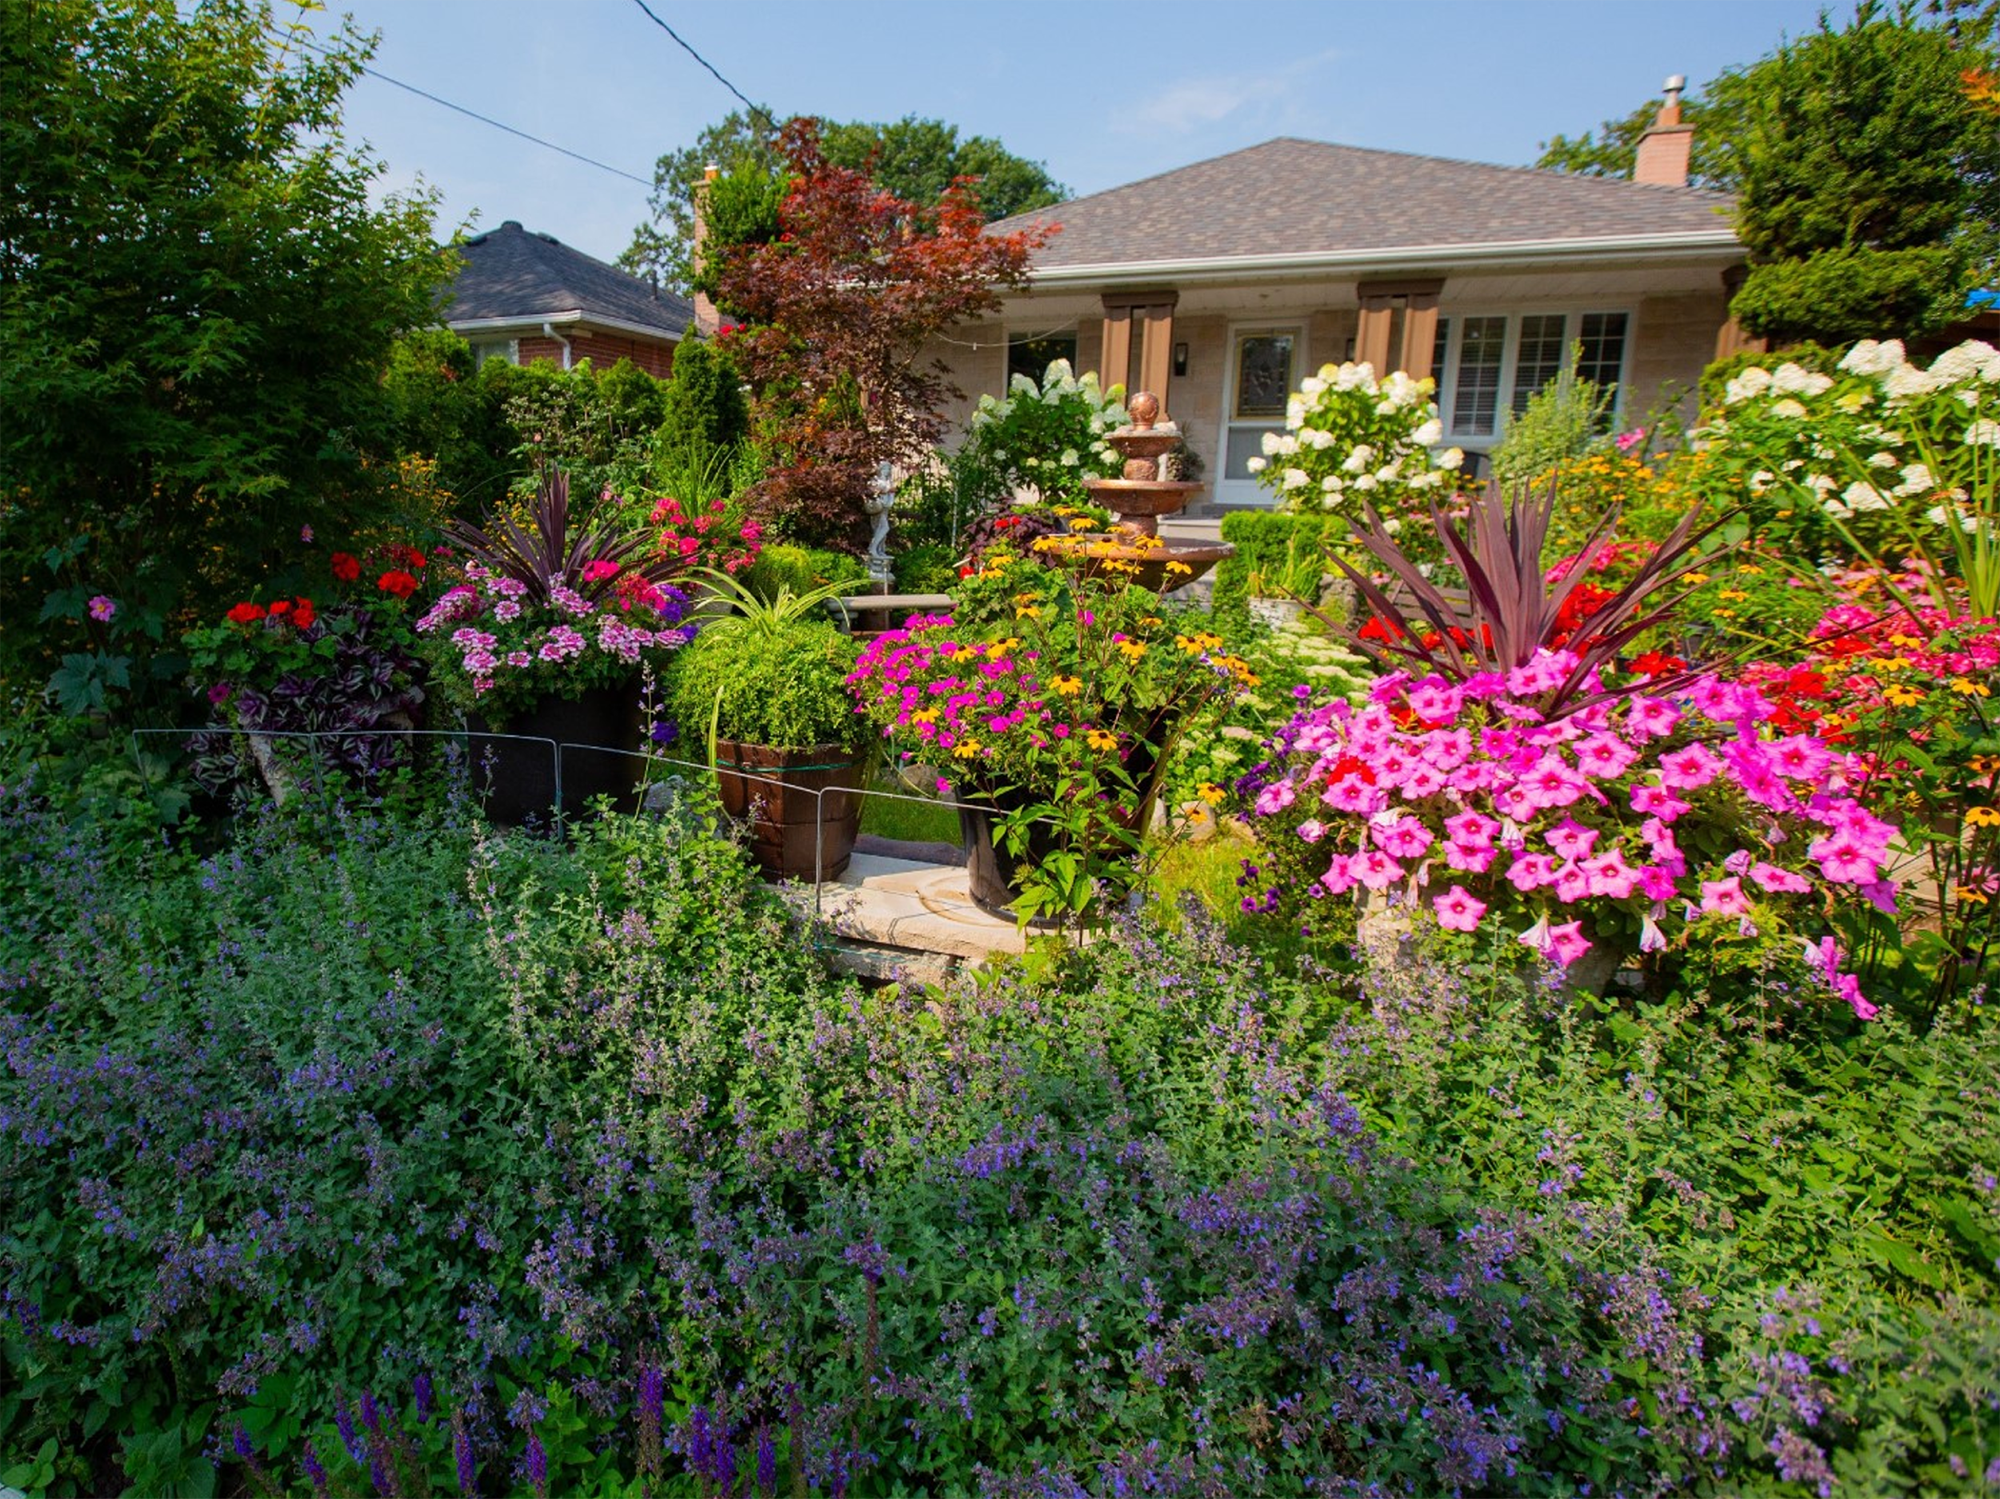 A photo of 2023’s residental traditional garden contest winner. The garden is filled with green plants with pink and orange flowers. There are flowering shrubs, and the house is in the background.